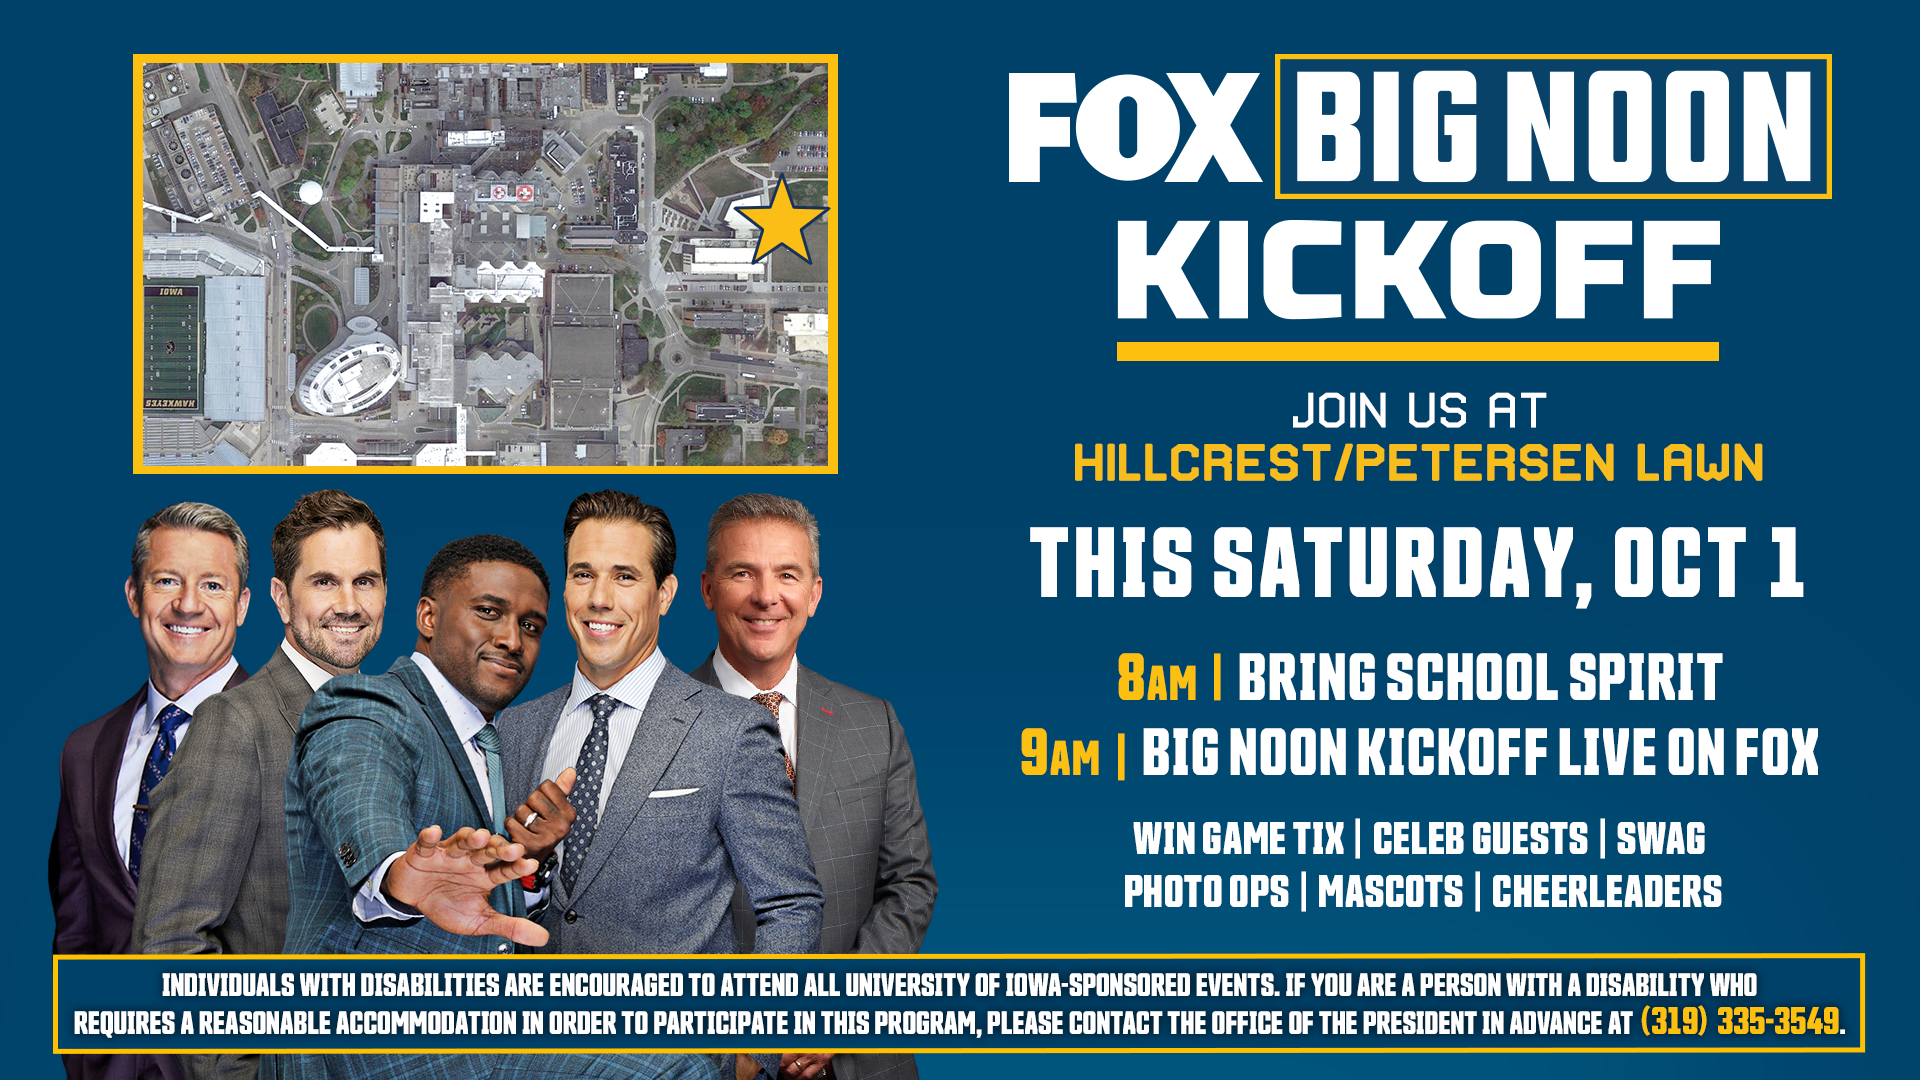 FOX Big Noon Kickoff Join us at Hillcrest/Petersen Lawn This Saturday, Oct 1st. 8am bring school spirit, 9am Big Noon Kickoff Live on Fox